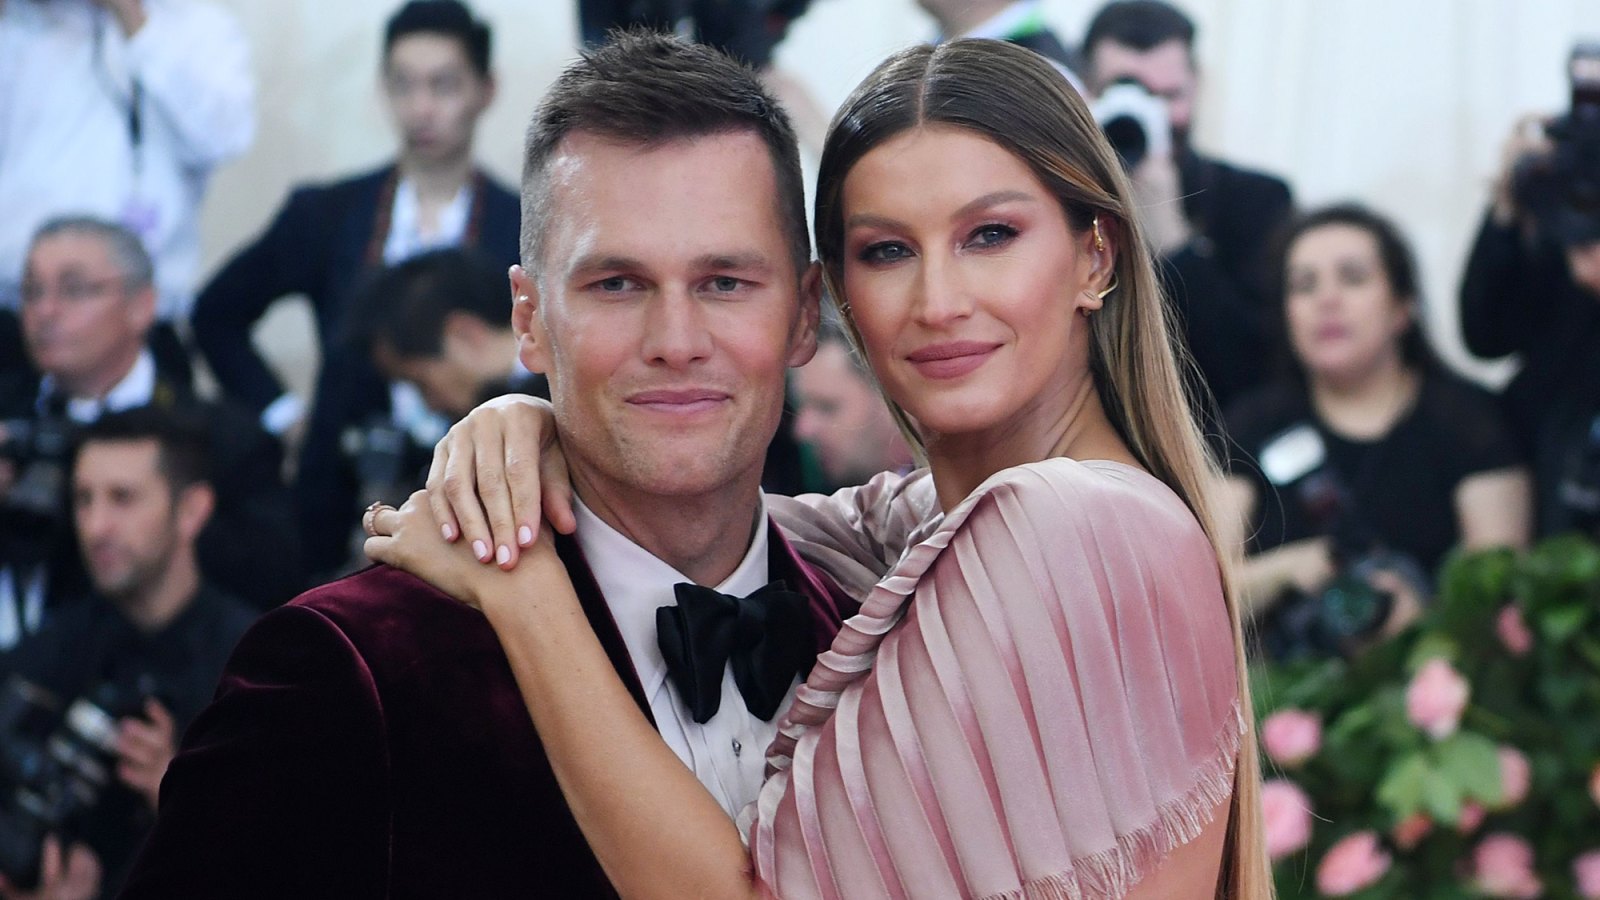 Tom Brady and Gisele Bundchen Are Working Through Things Amid Tension From His Return to the NFL